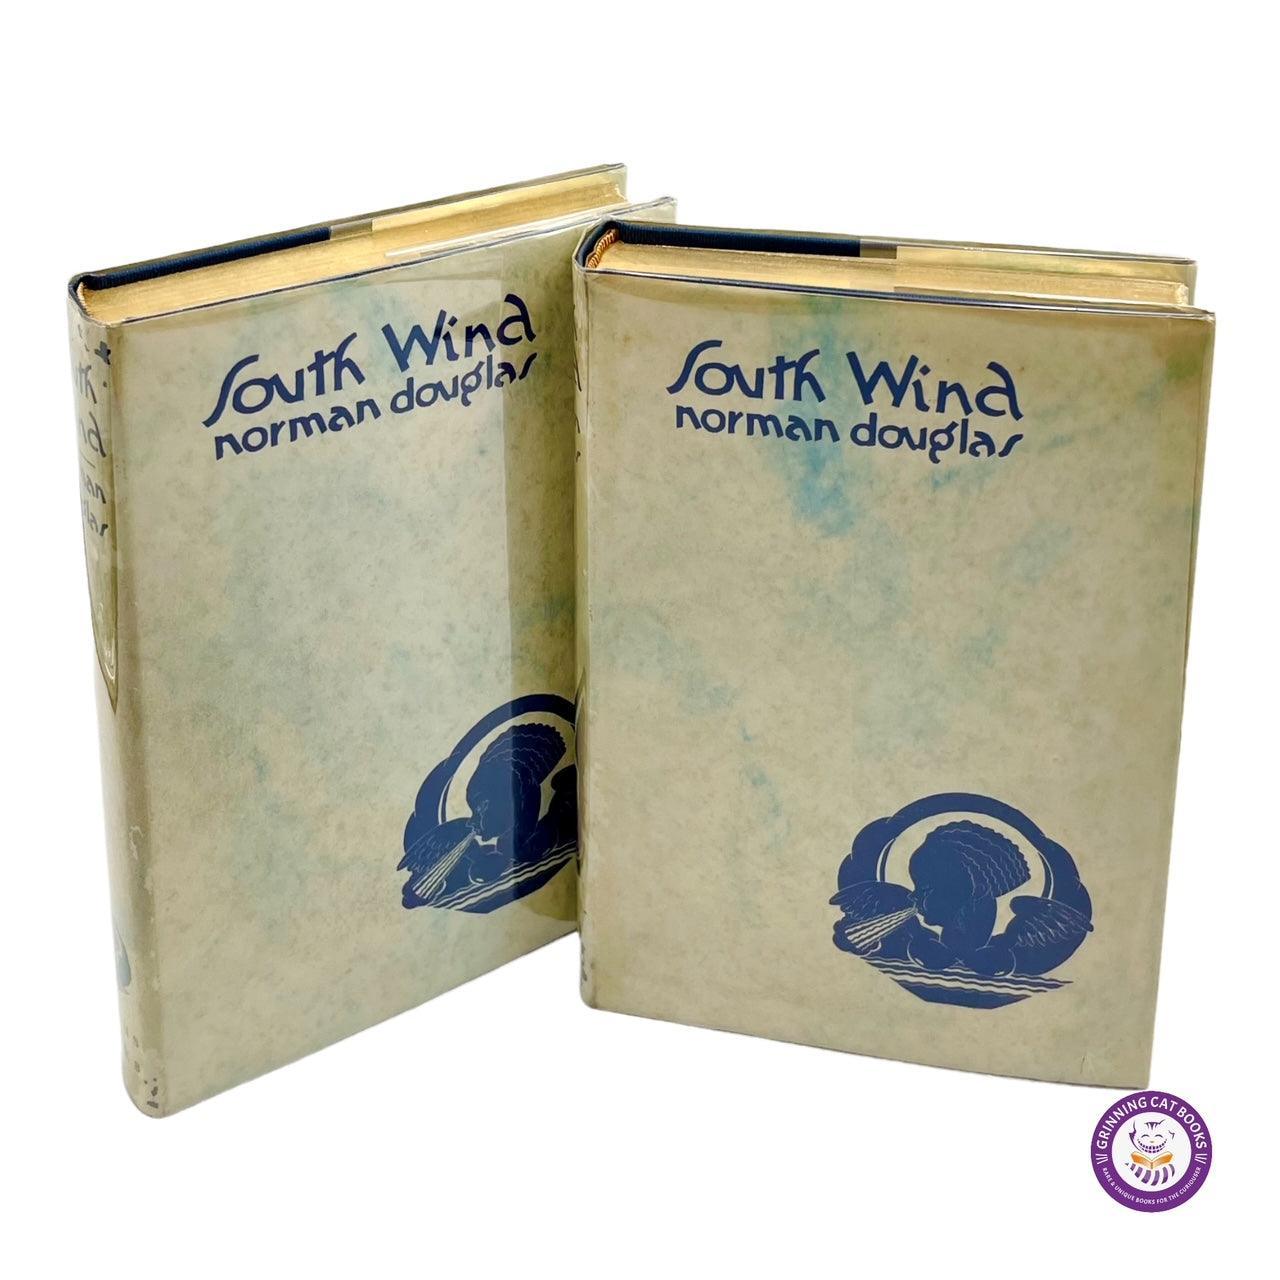 South Wind - Grinning Cat Books - LITERATURE - 